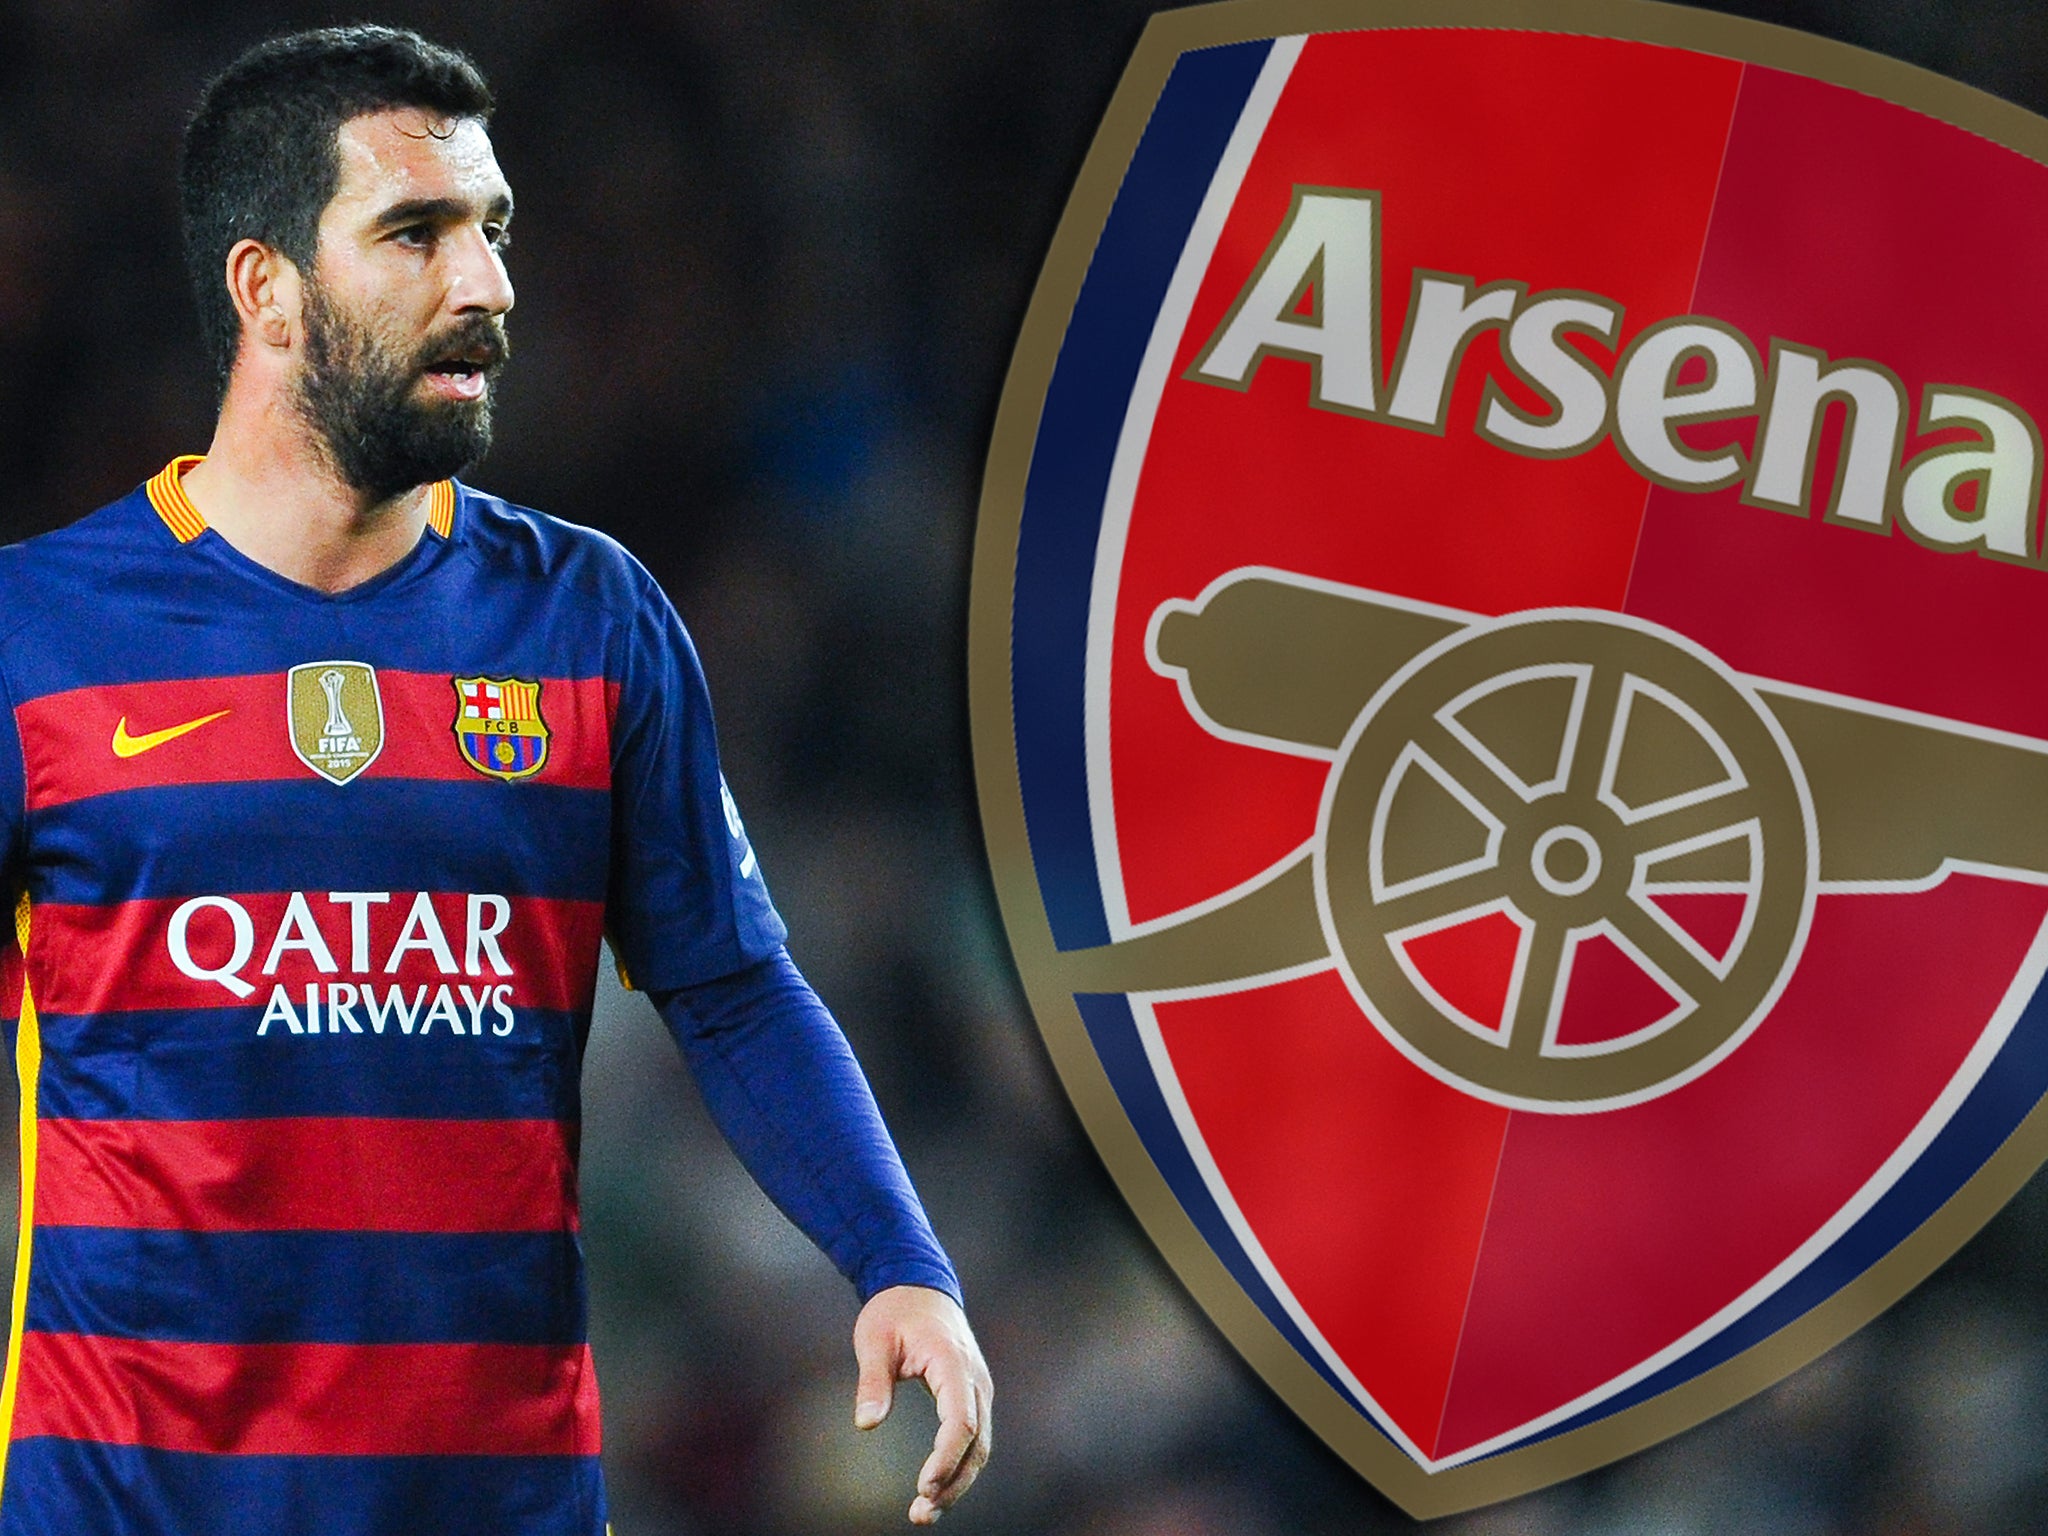 There is speculation that Arsenal see Turan as a perfect replacement for Ozil